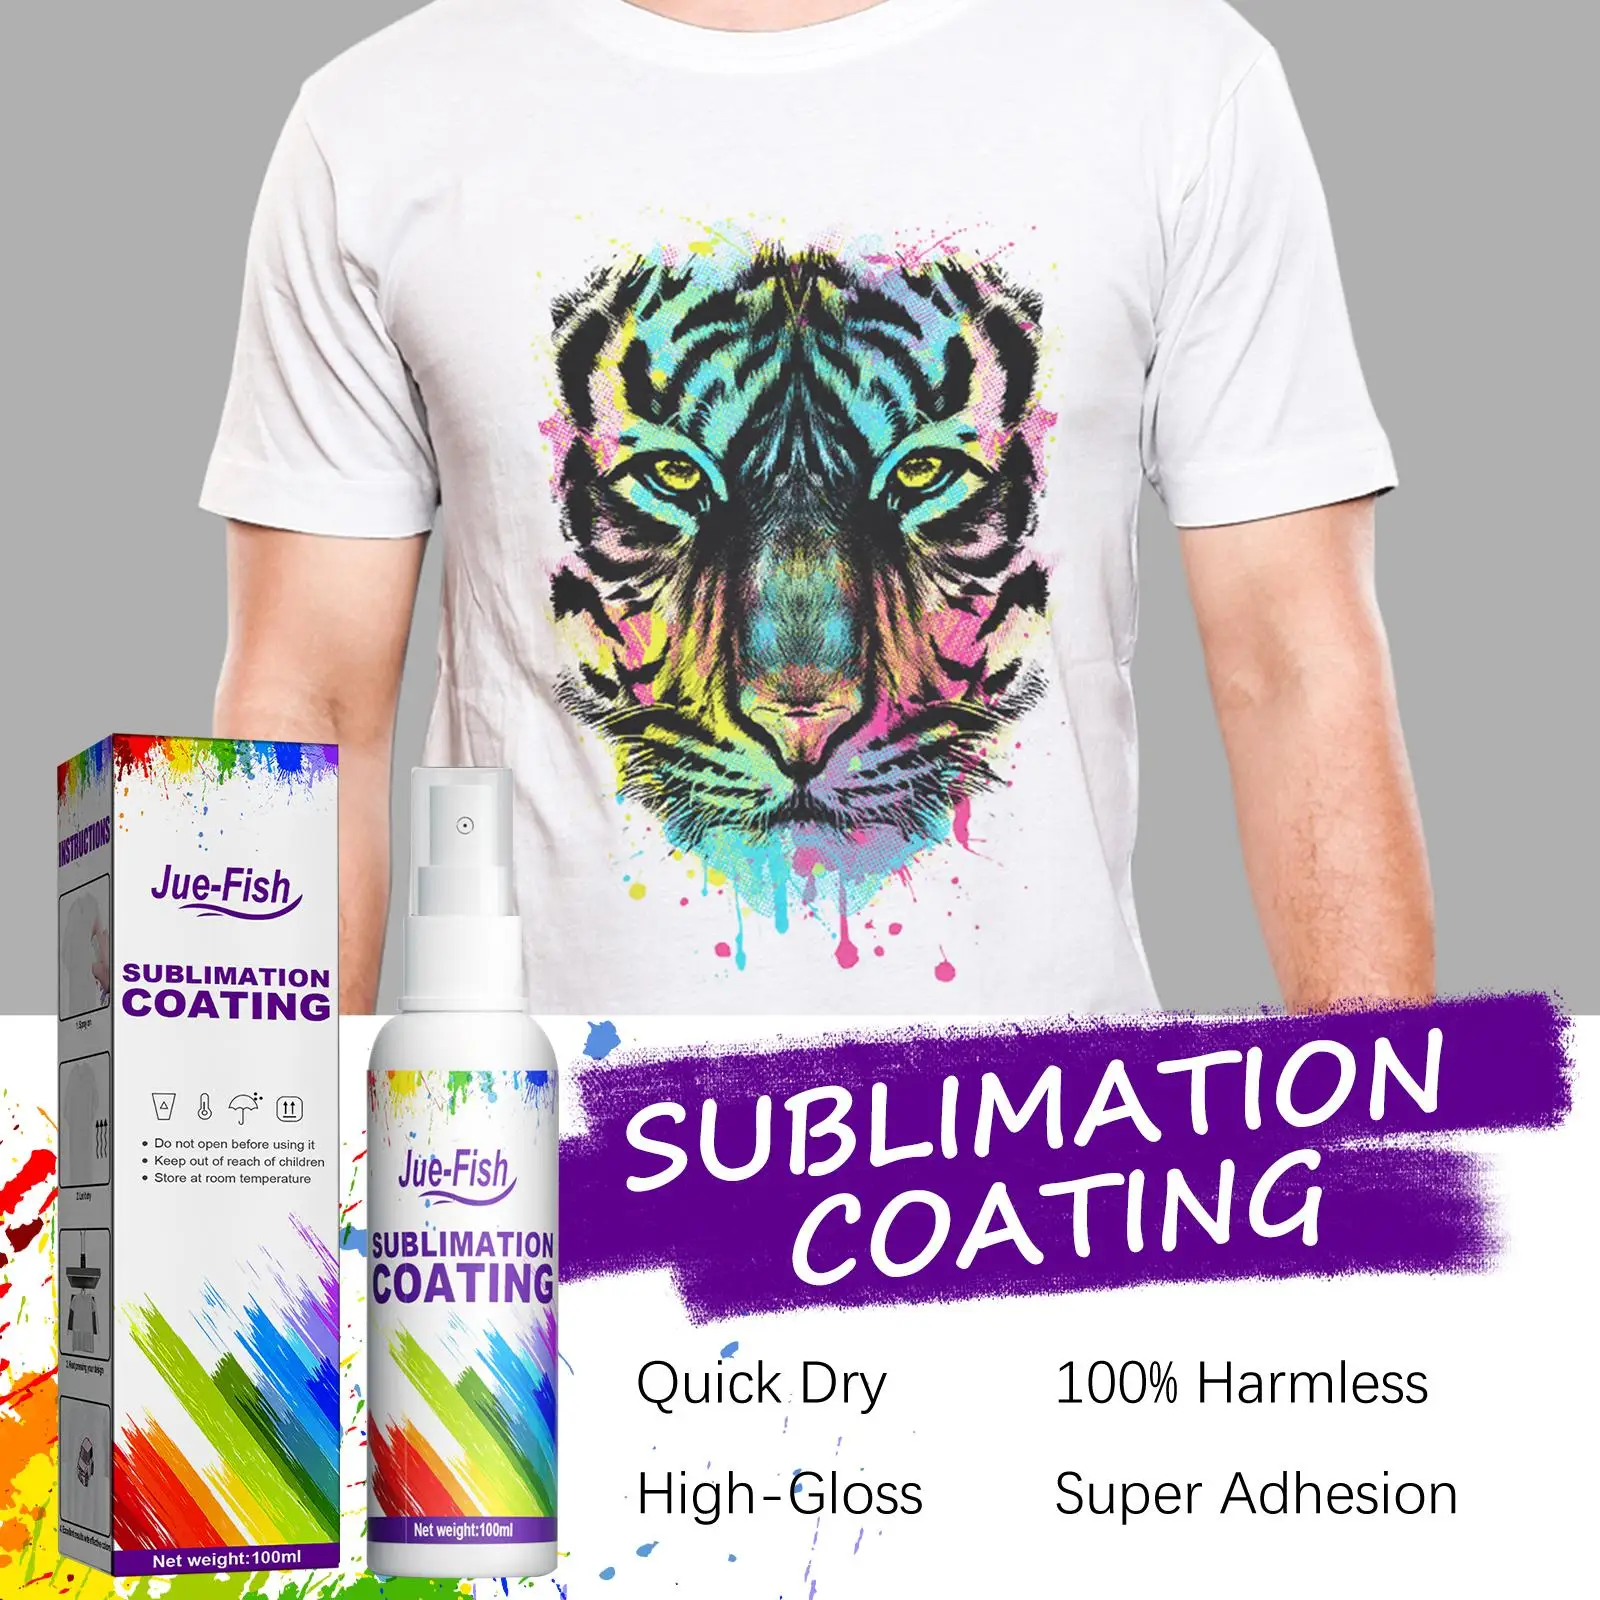 

Sublimation Coating Spray For Cotton T-Shirts, All Fabric Includes Canvas, Carton, Tote Bag With High Gloss Finish And Quic Q6E7